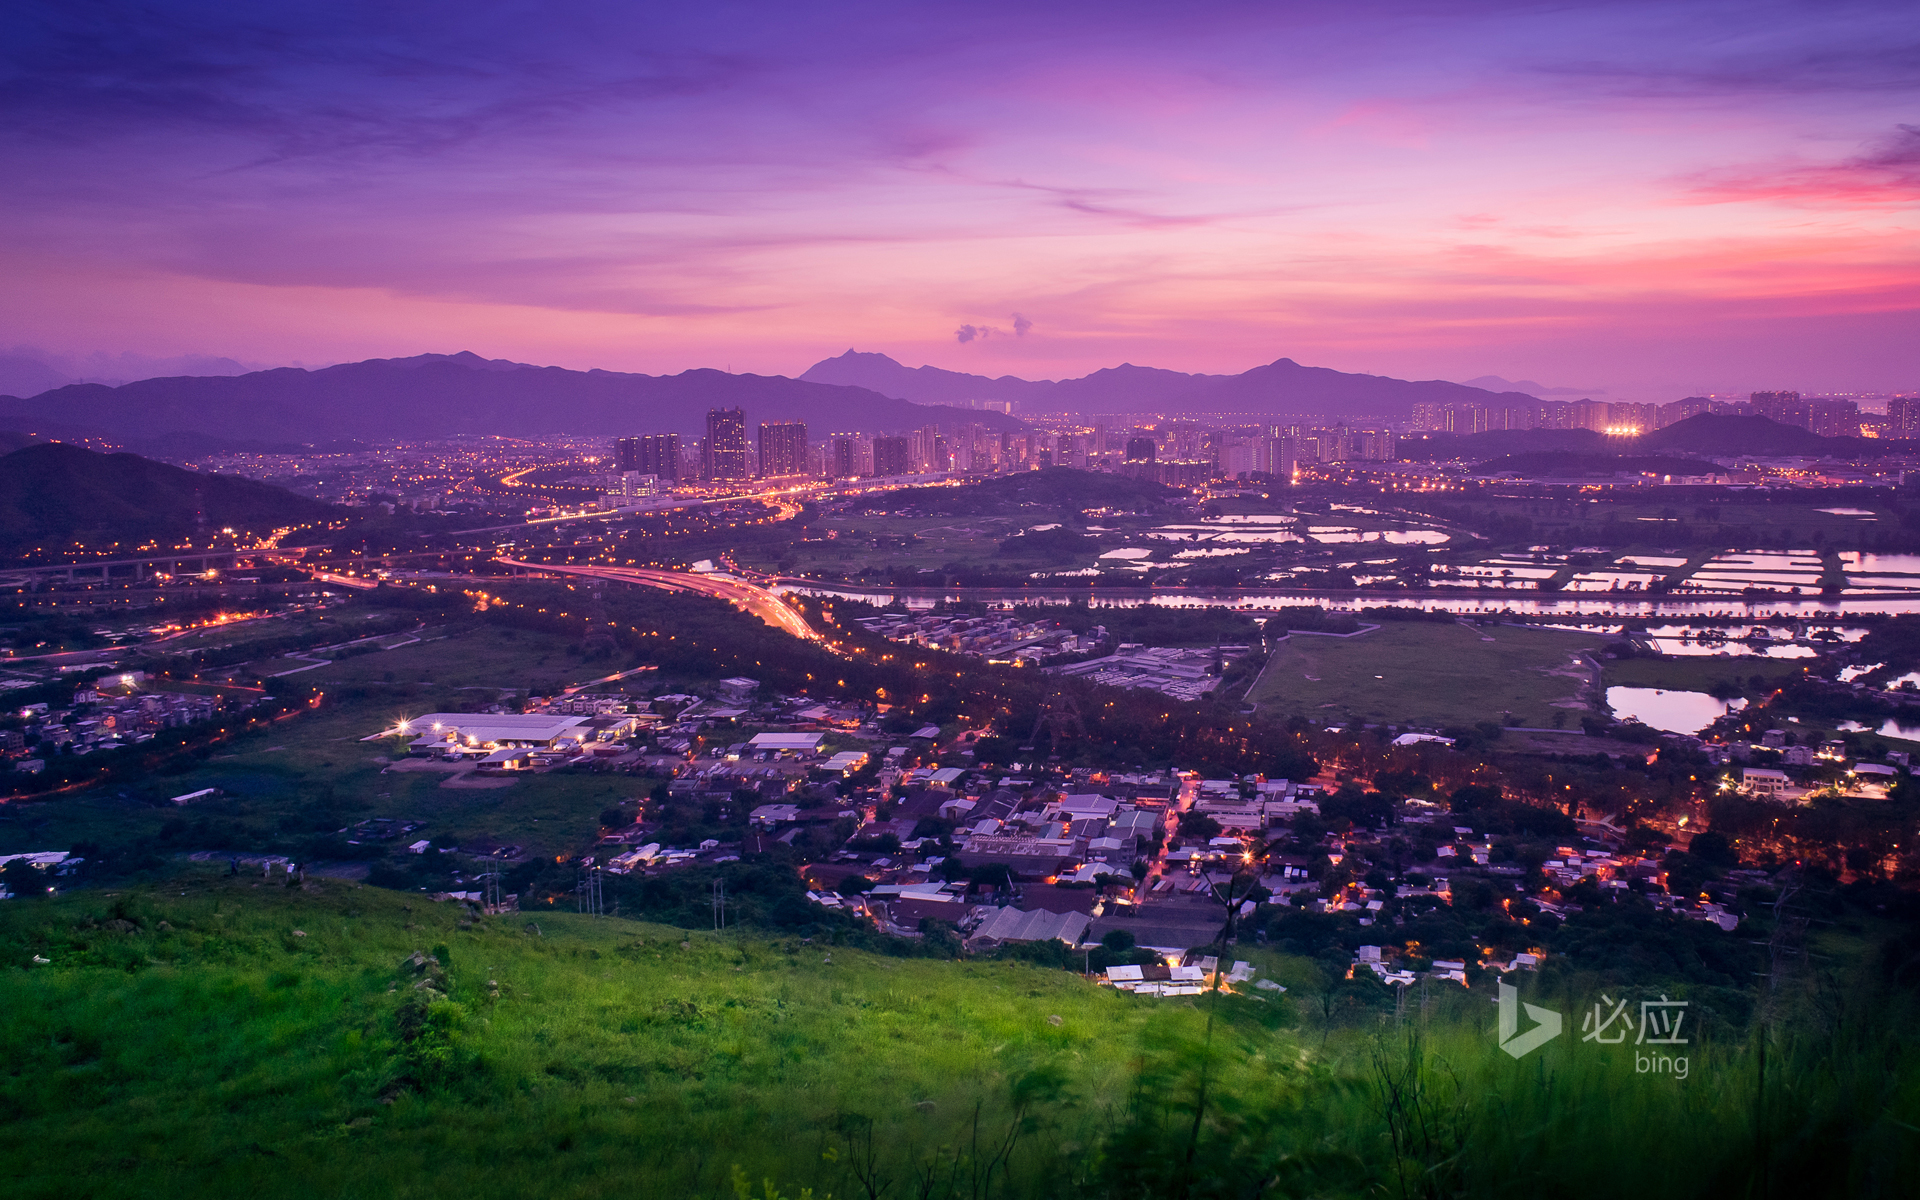 Enjoy the scenery of Yuen Long from a hill in Hong Kong at sunset